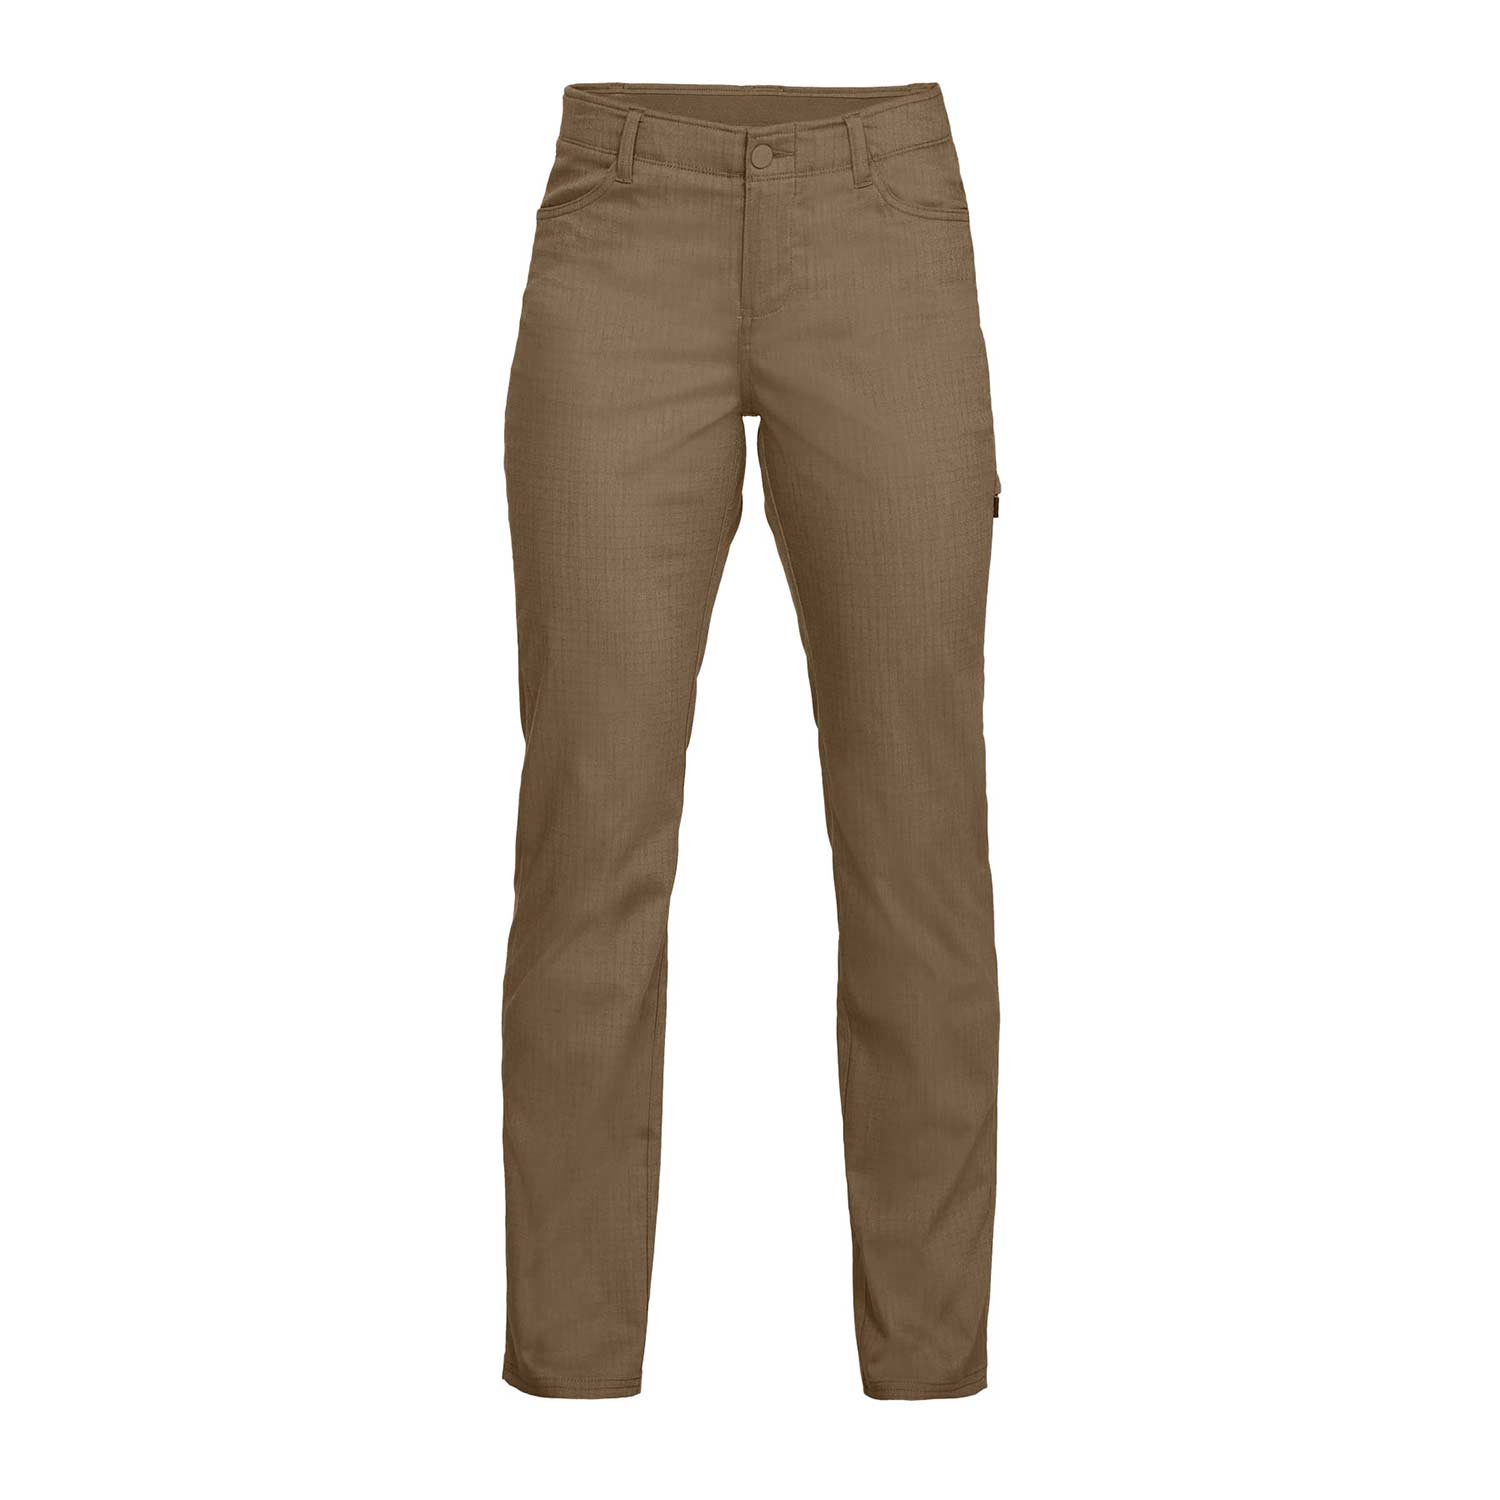 UNDER ARMOUR WOMENS ENDURO TACTICAL PANTS